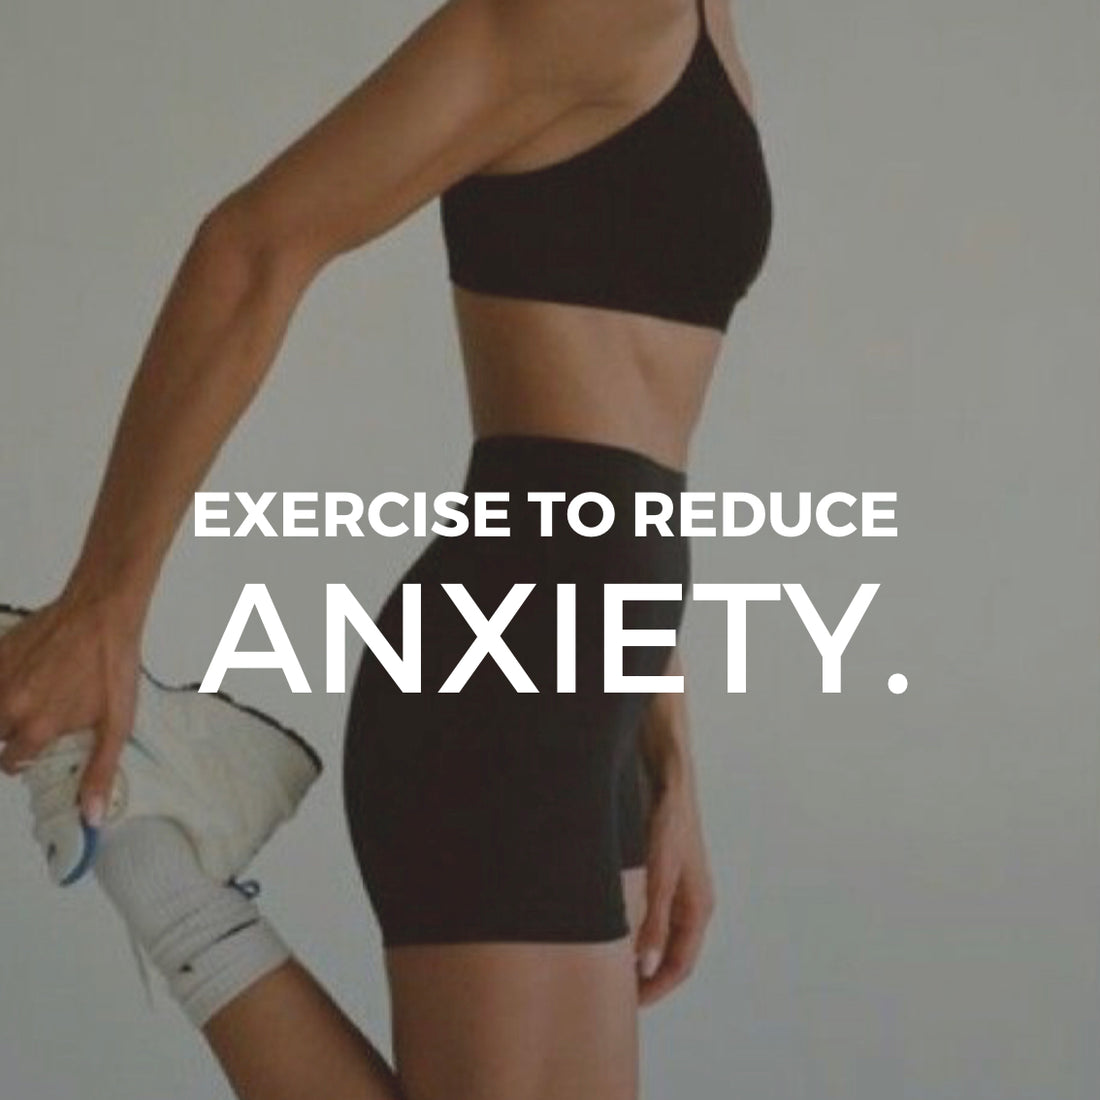 Exercise Reduces Anxiety.